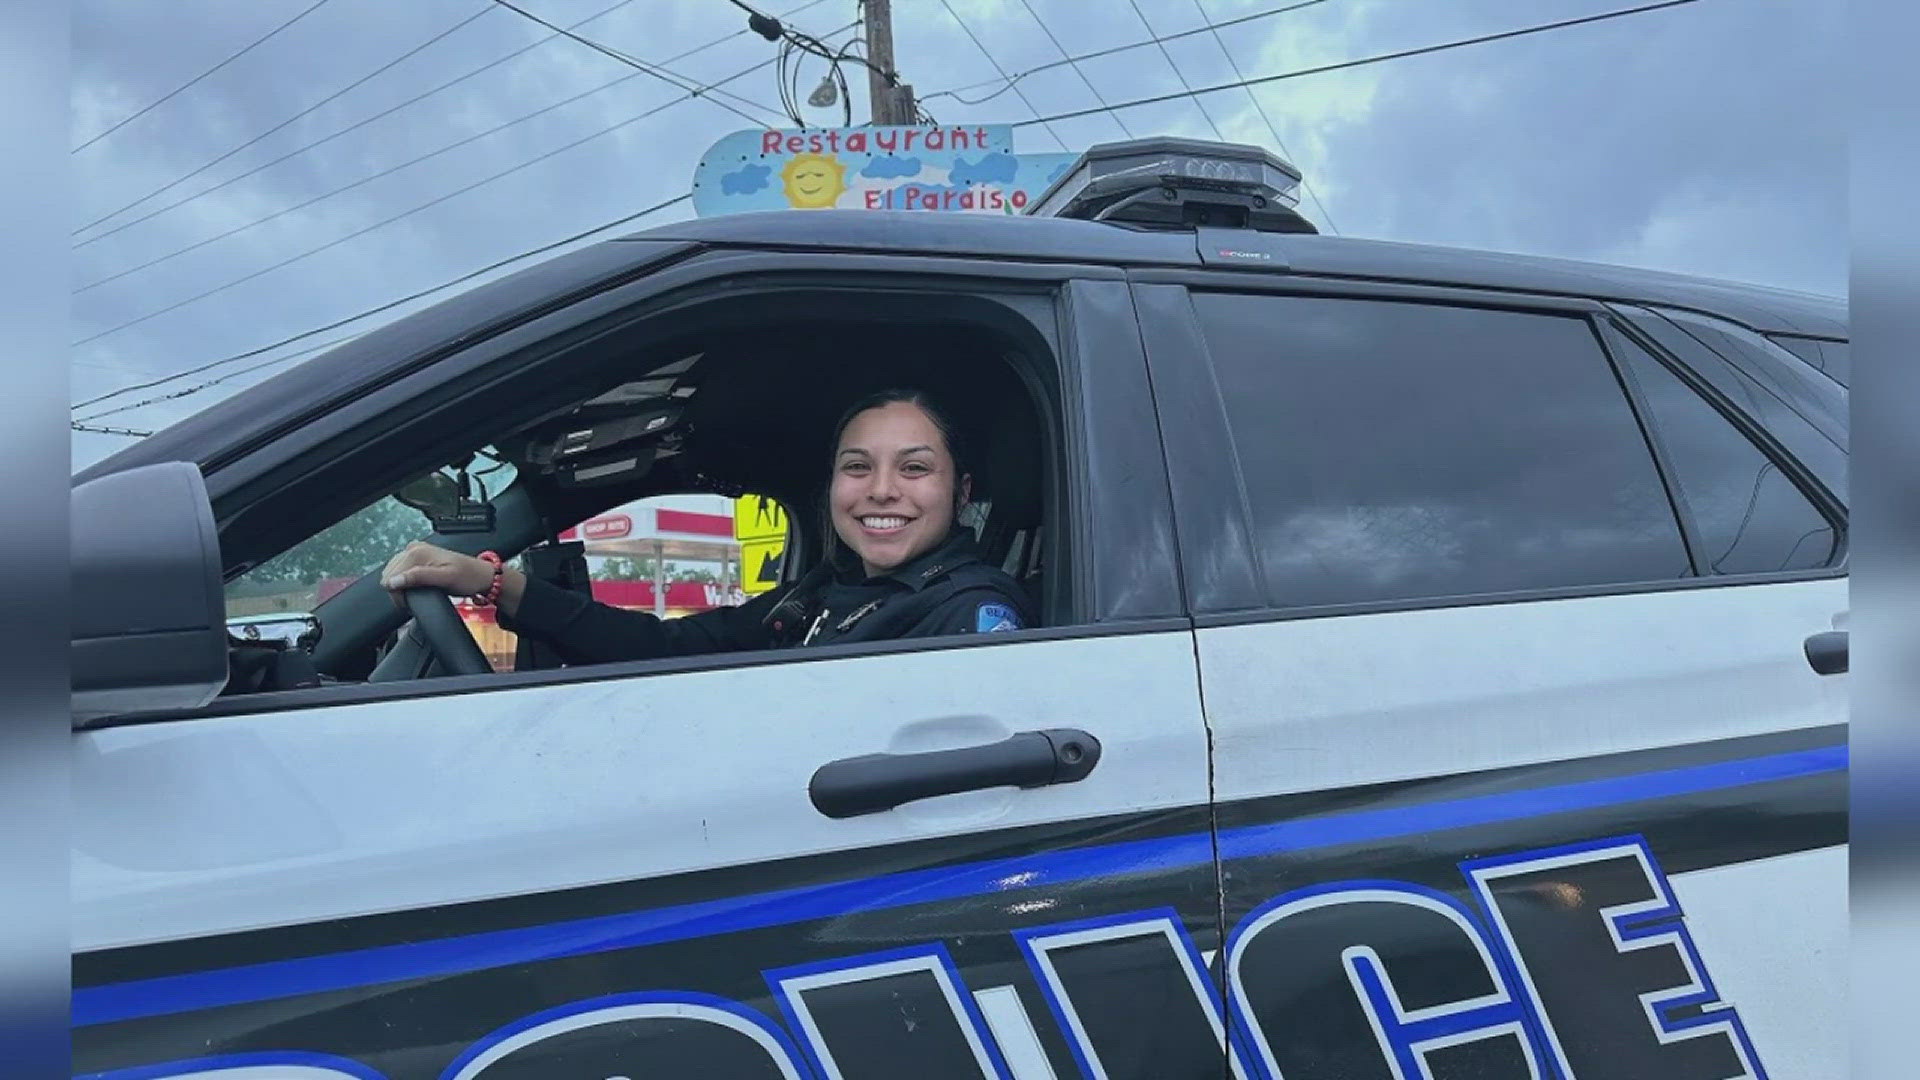 Officer Sidney Gomez, 28, says she became interested in her role after hearing her criminal justice professors share their memories about the police force.